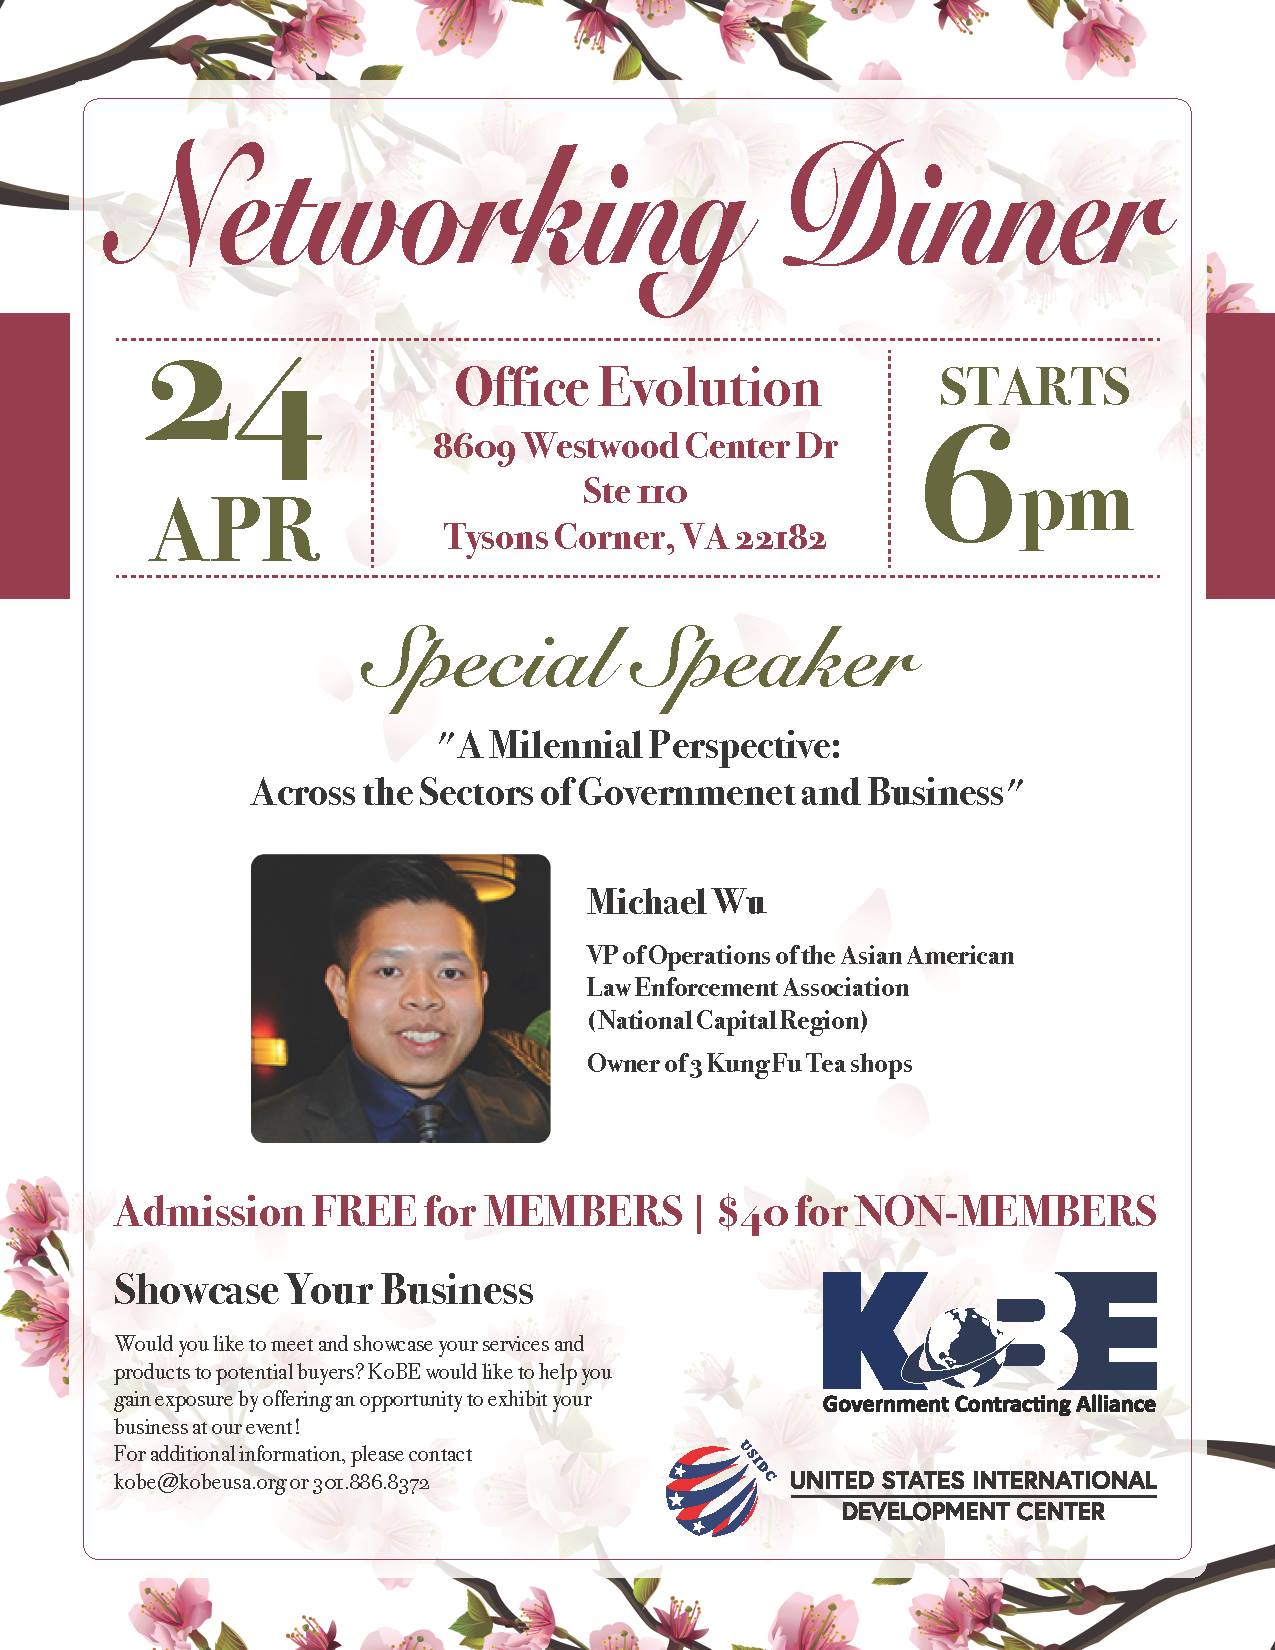 KoBE and USIDC Bimonthly Meeting Apr 24, 2018 featured image